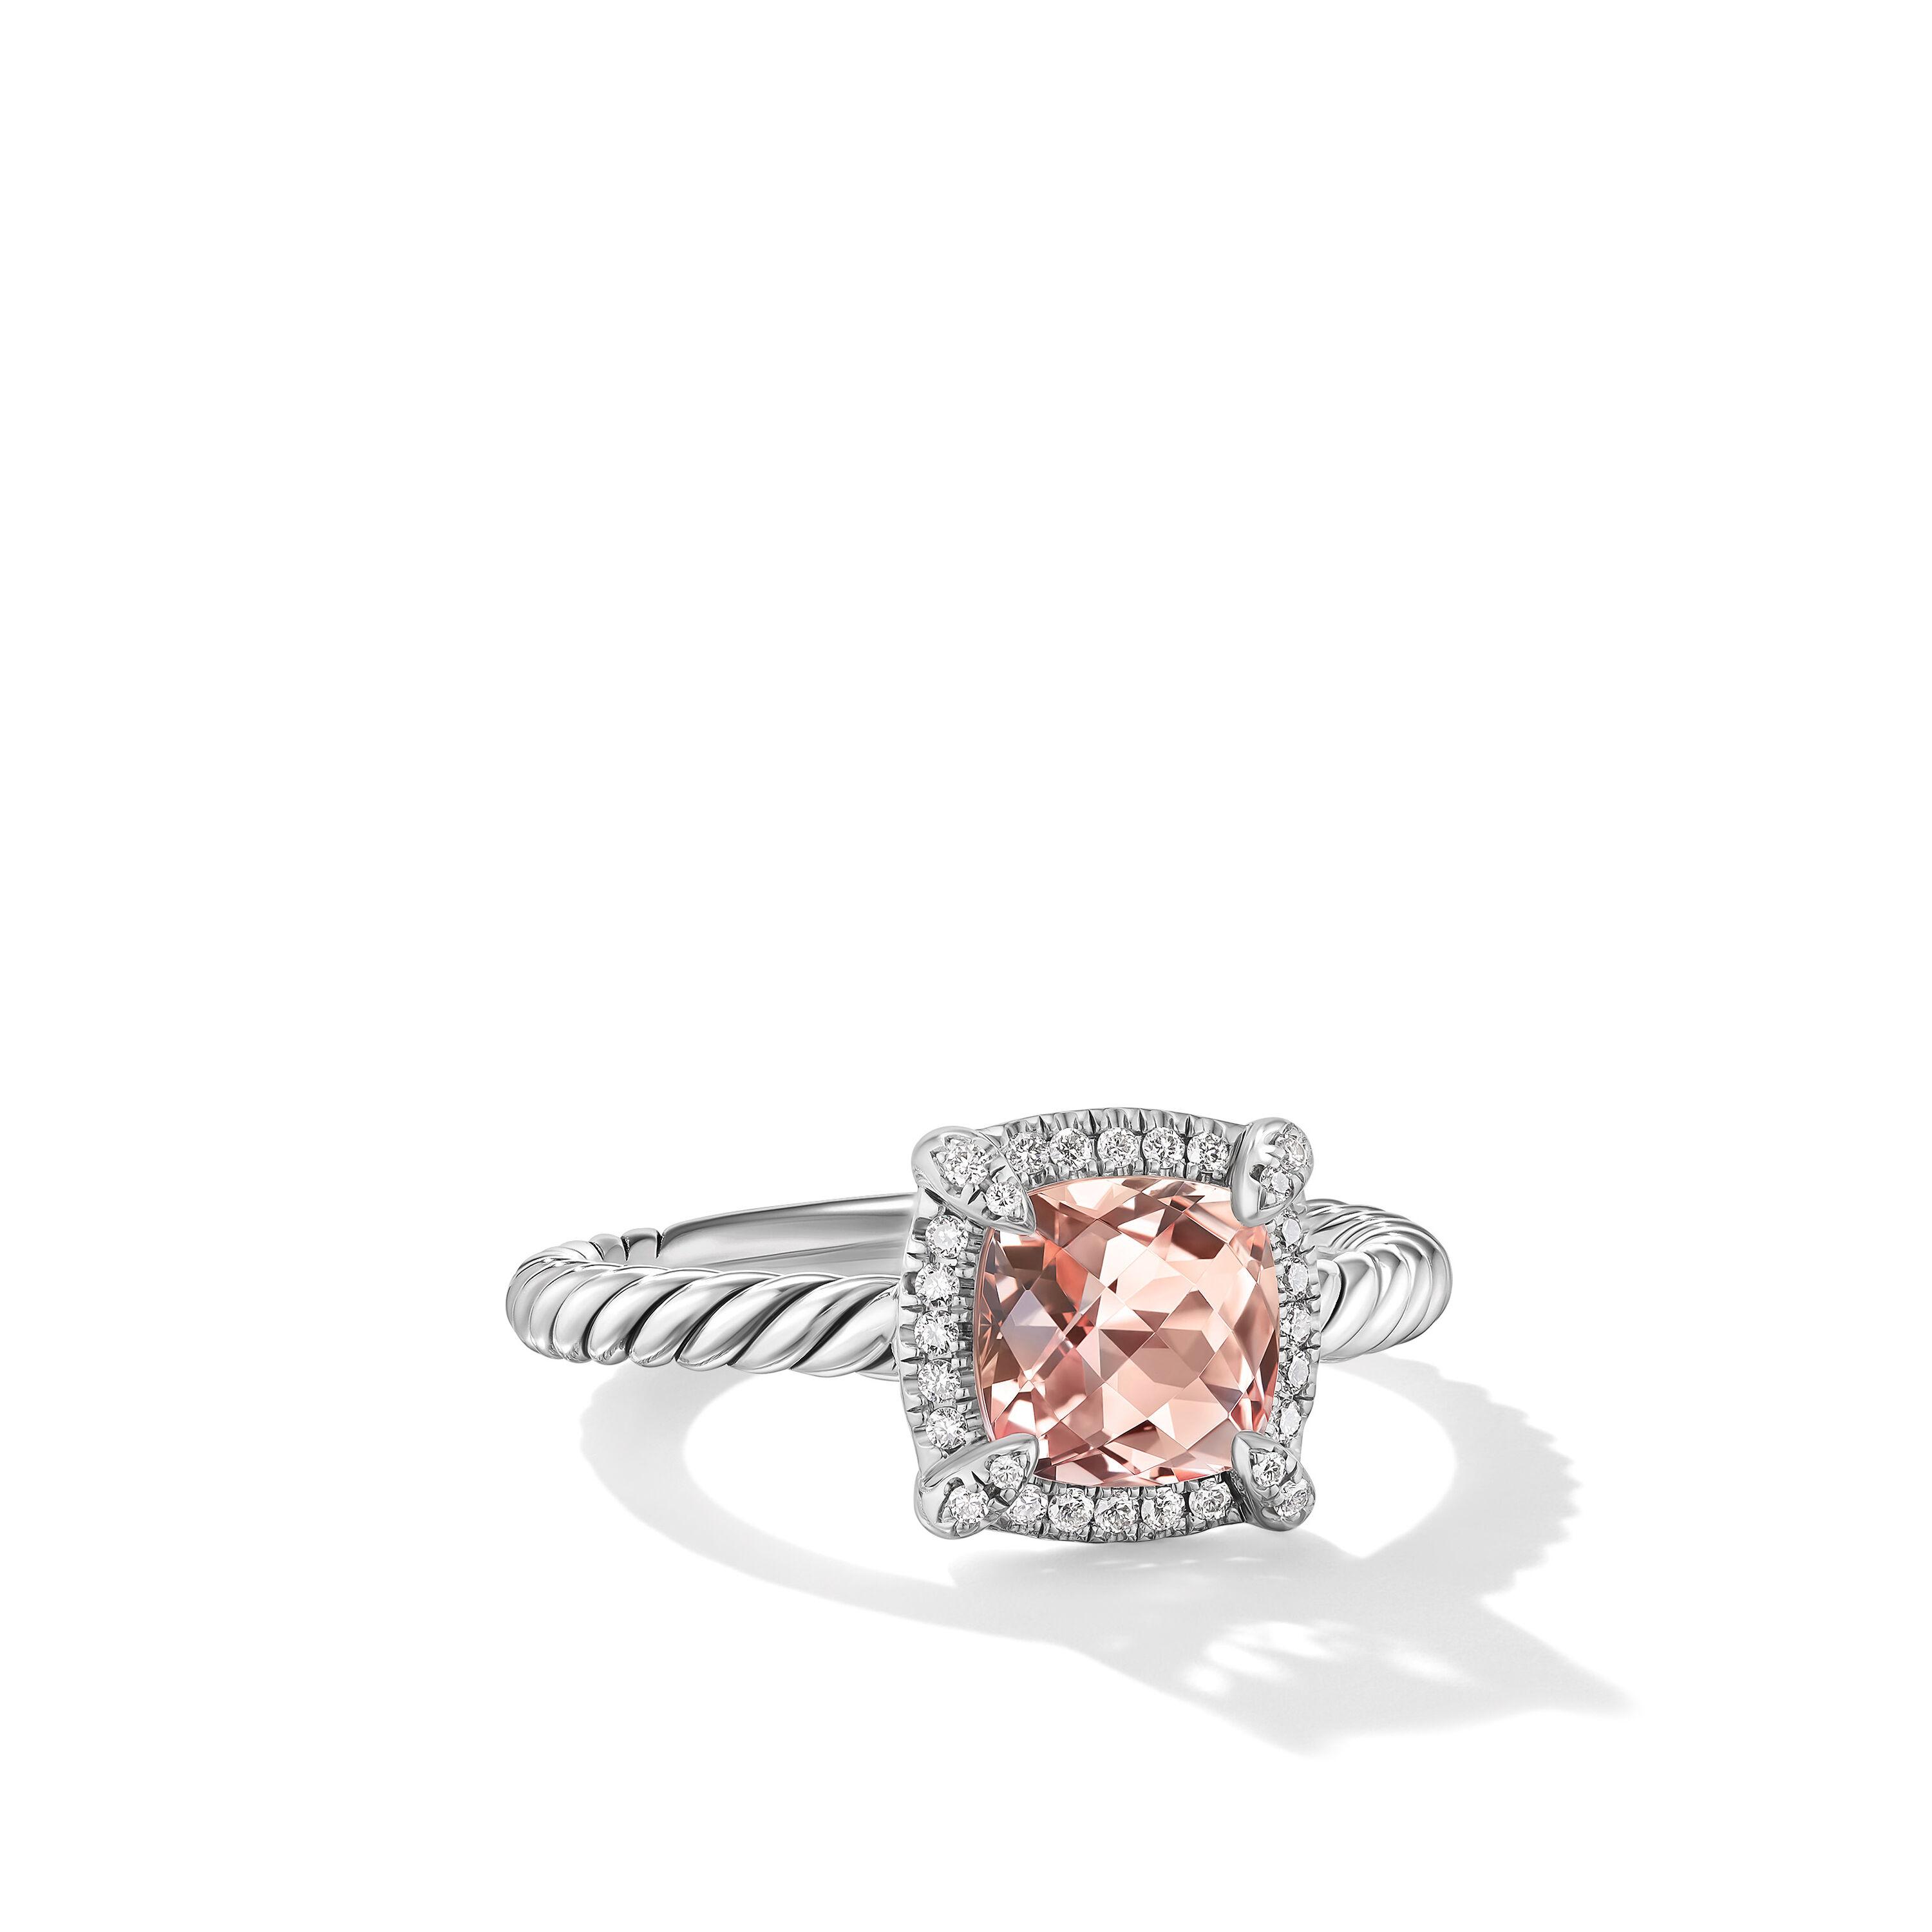 David Yurman Petite Chatelaine Pave Bezel Ring in Sterling Silver with Morganite and Diamonds, Size 5.5 0